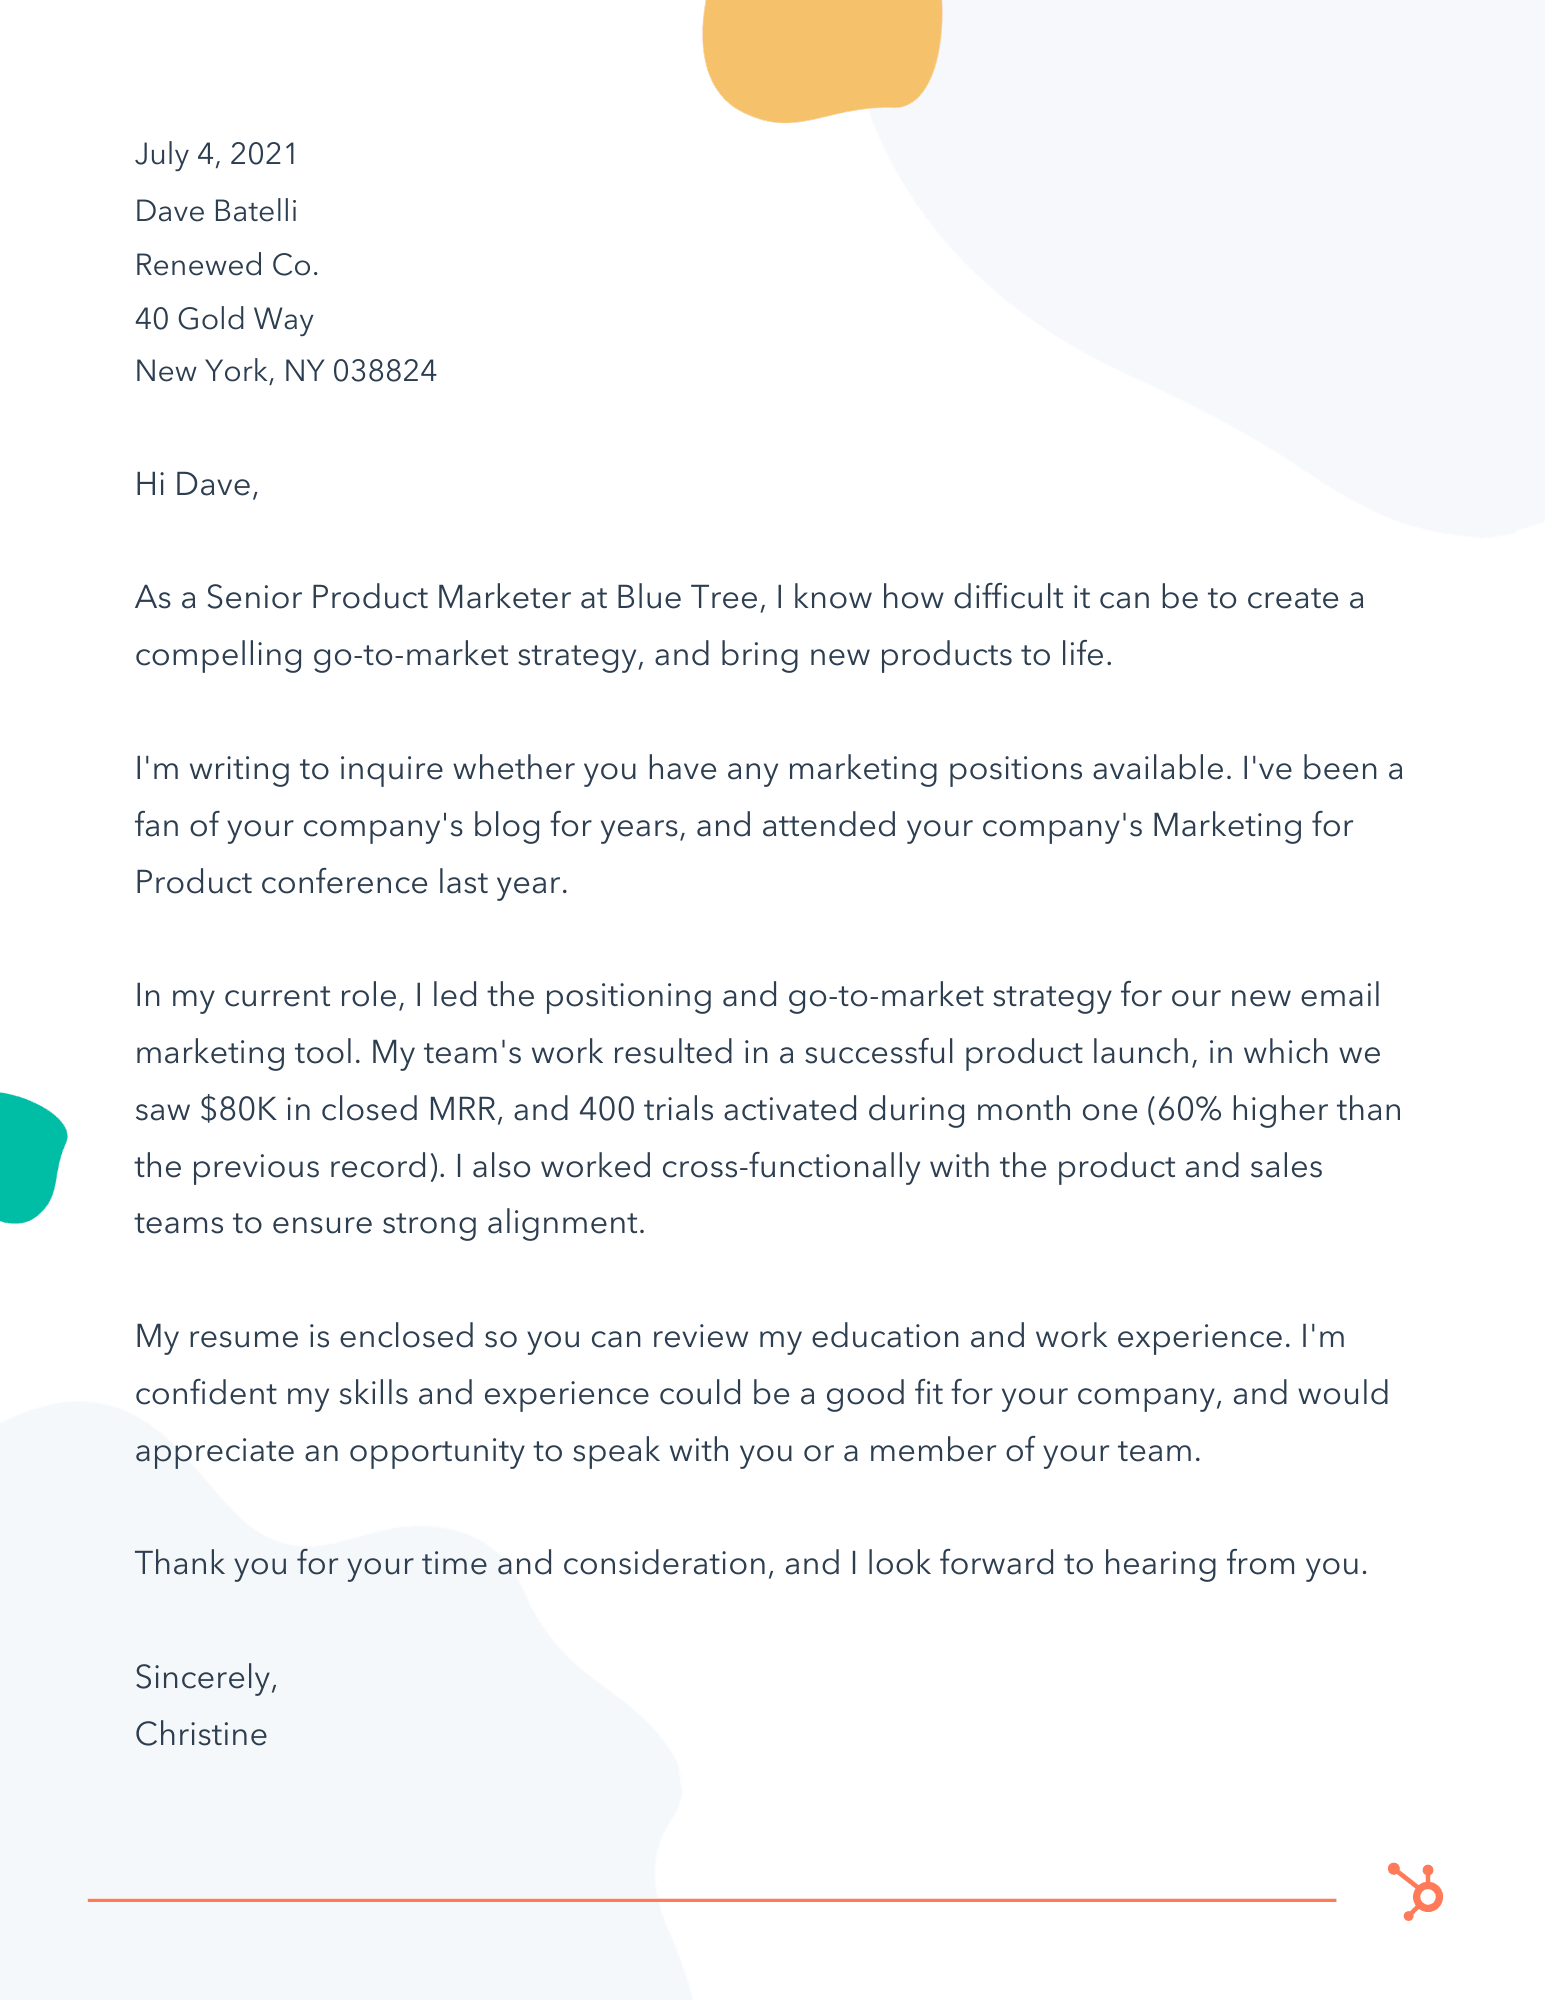 How to Write a Letter of Interest in 24 [Examples + Template]